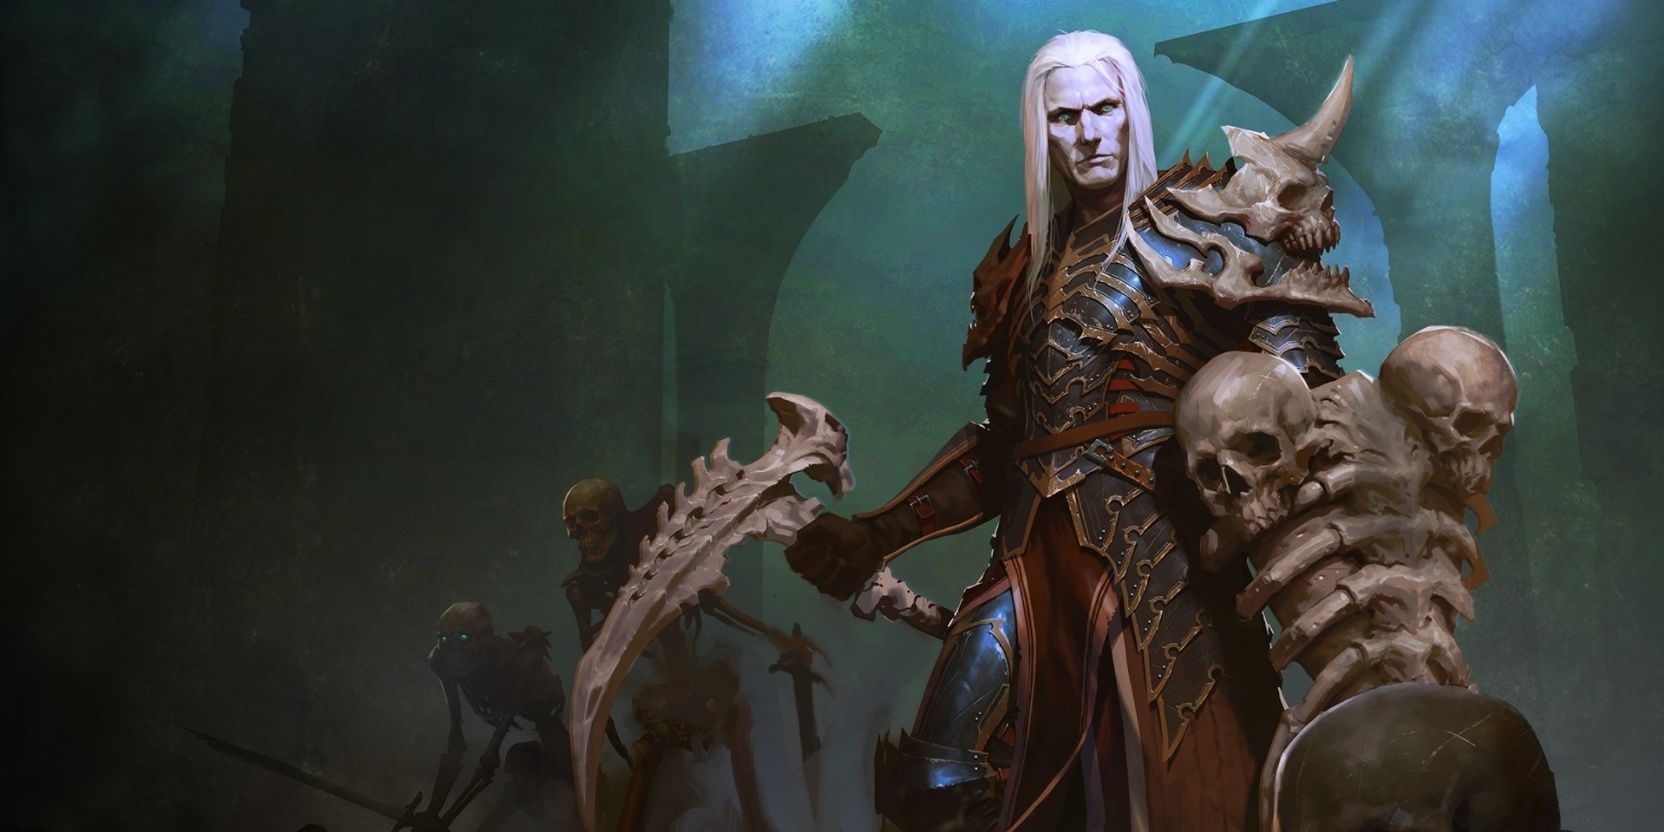 Artwork for the expansion packs in Diablo III